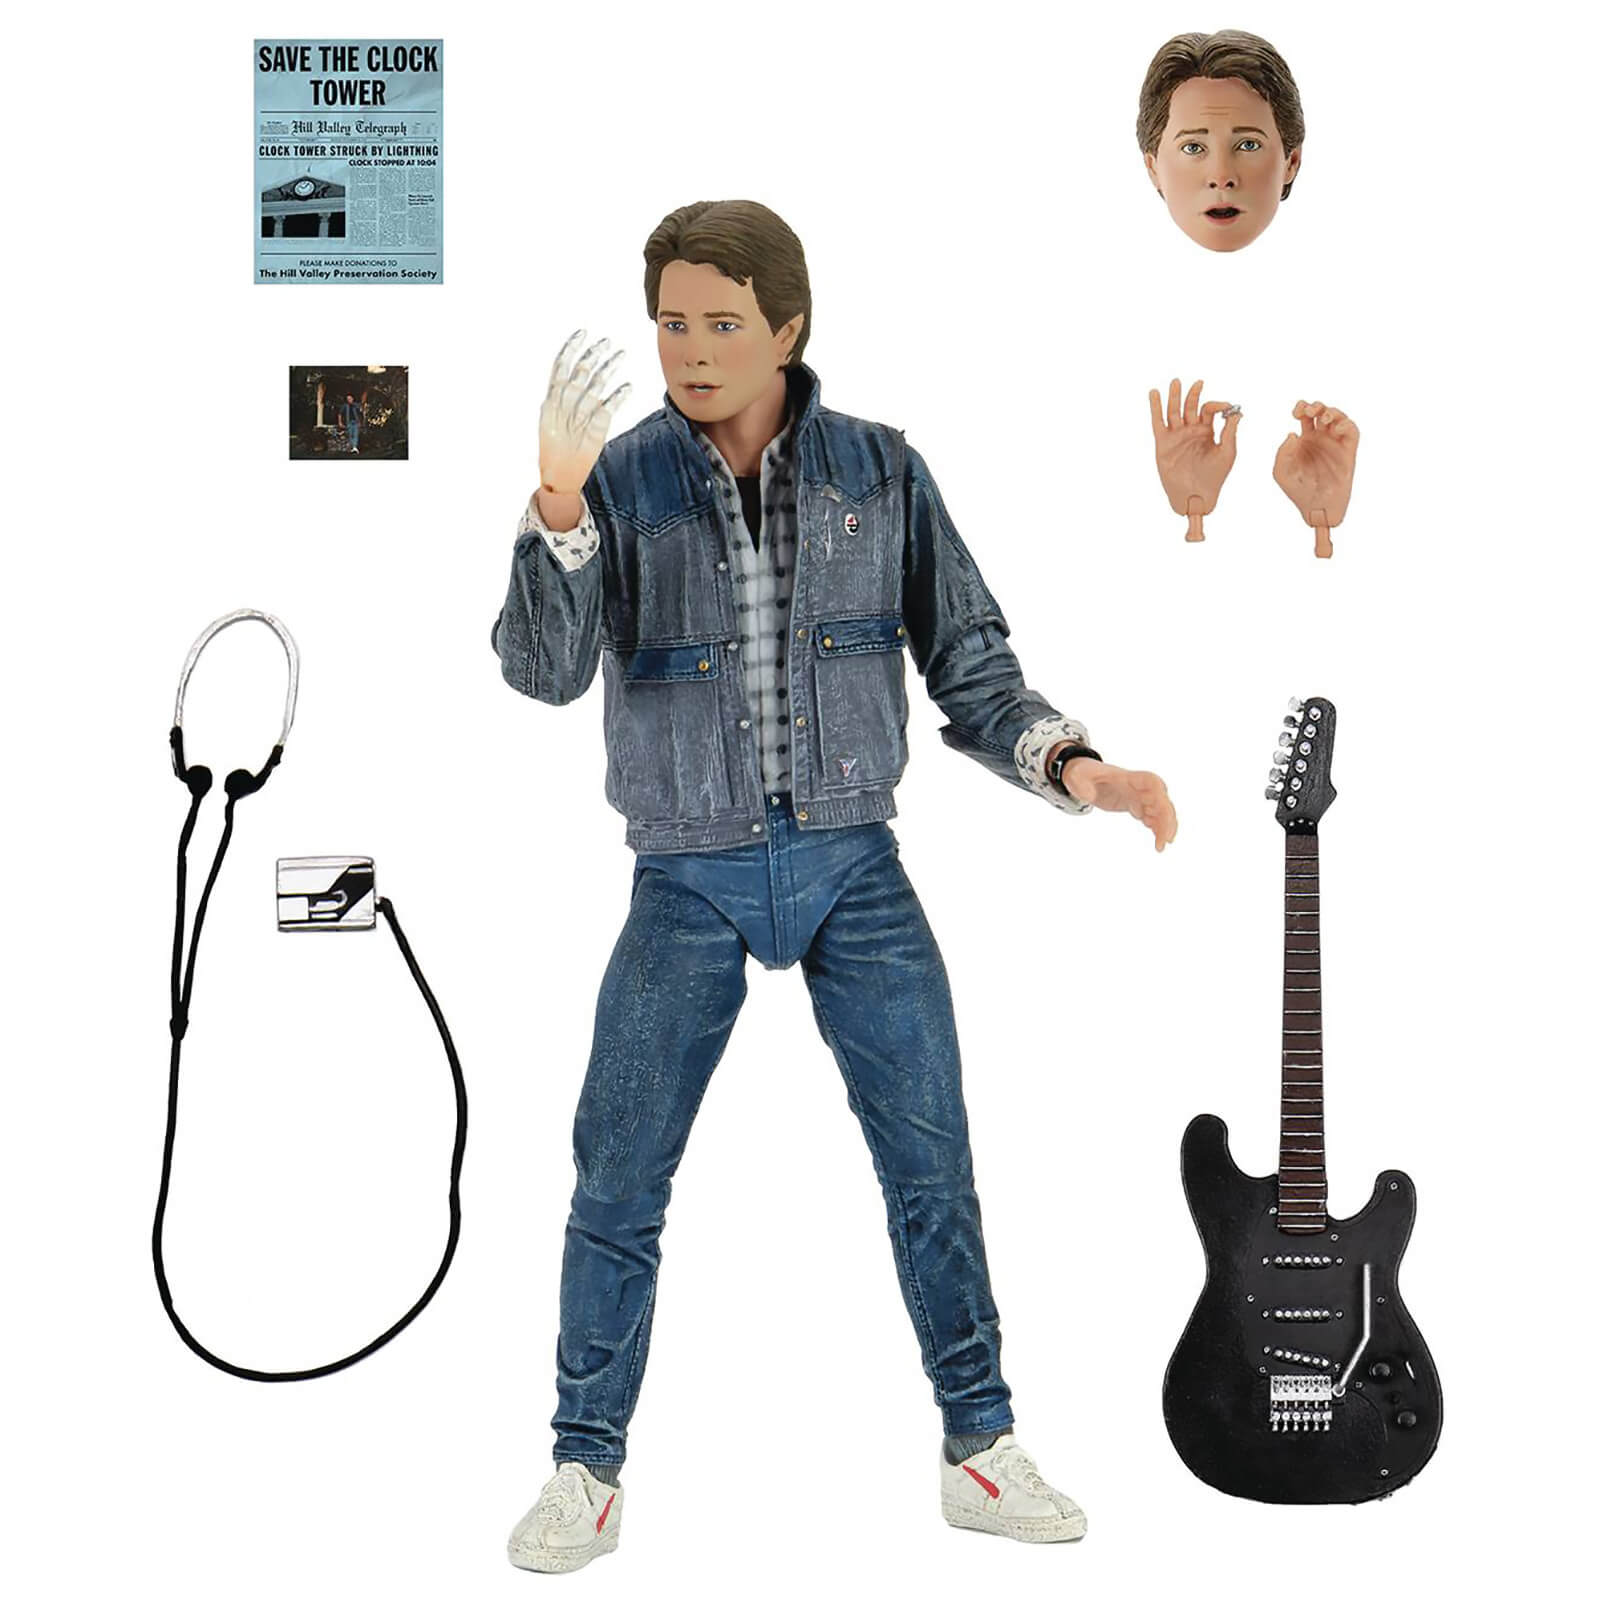 Image of Marty McFly 1985 Guitar Audition (Back to the Future) Neca Action Figure